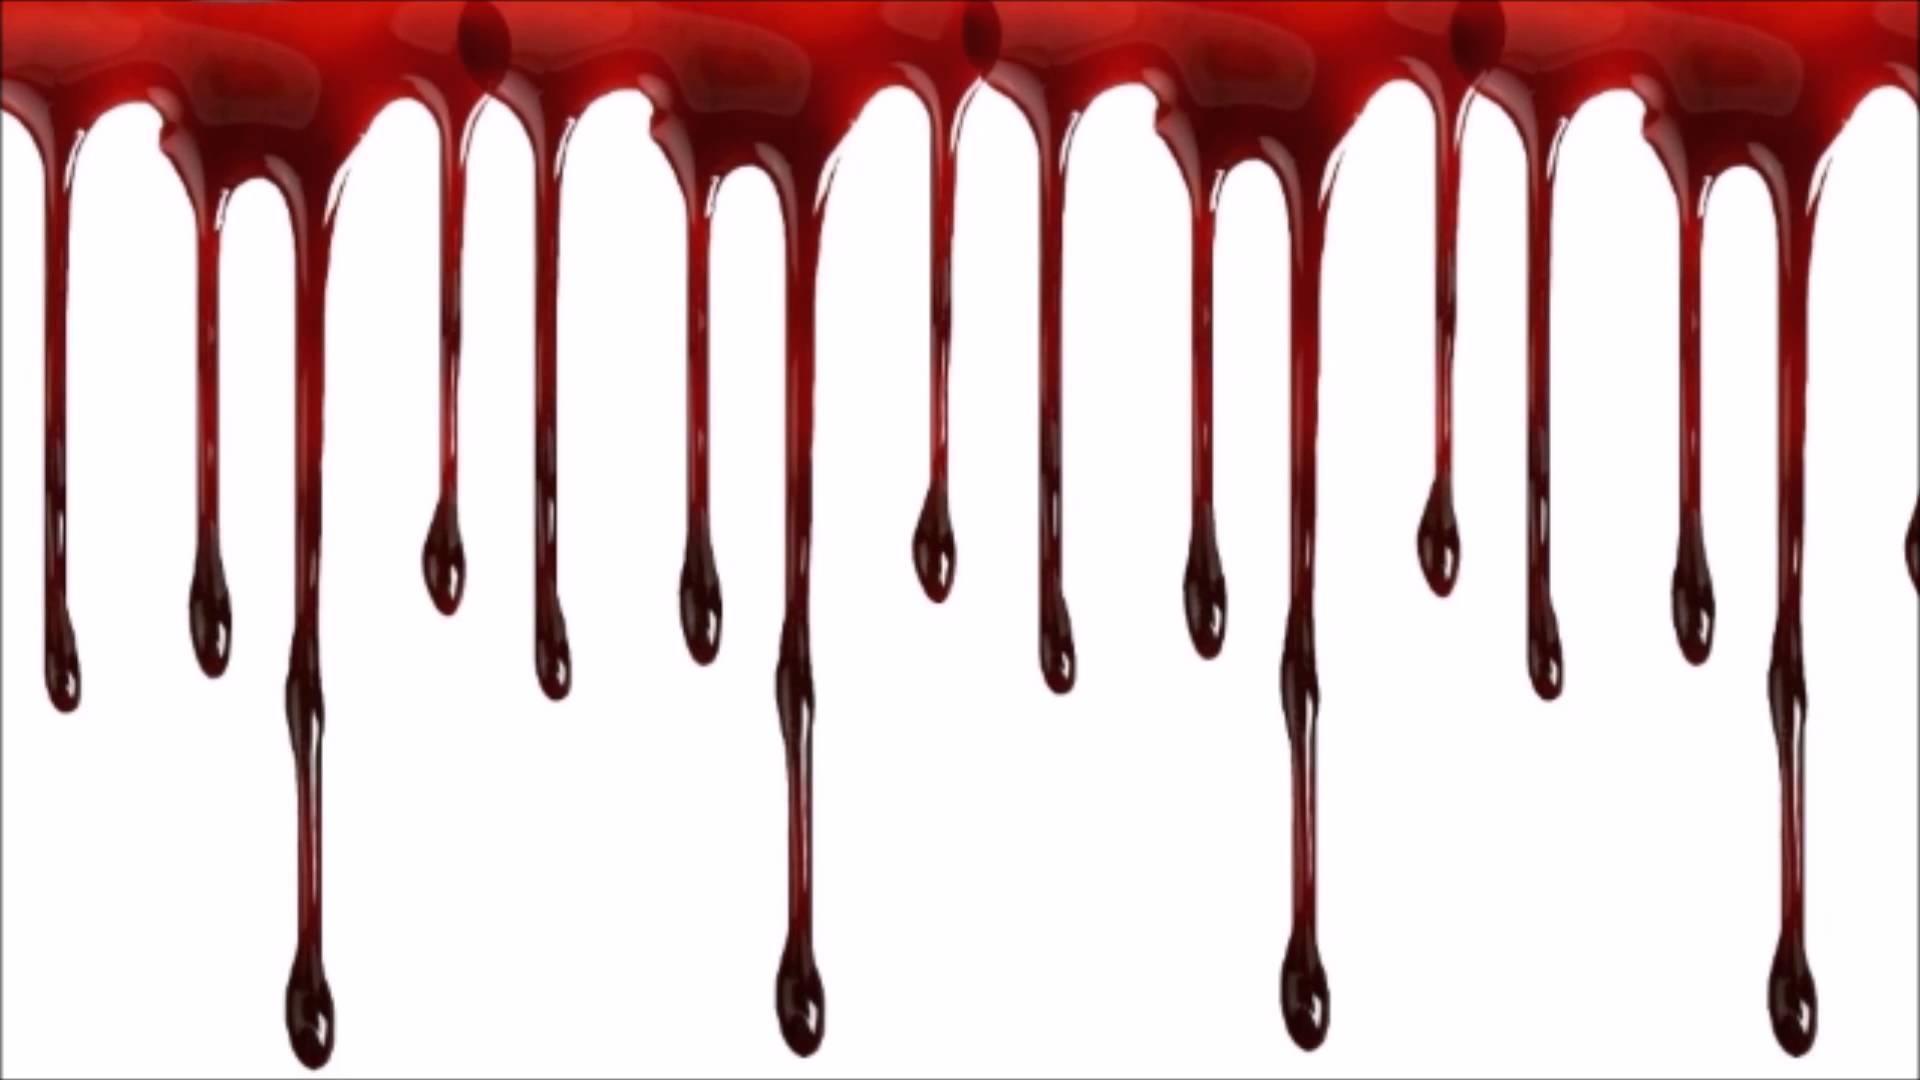 Blood Dripping Sound Effect - YouTube